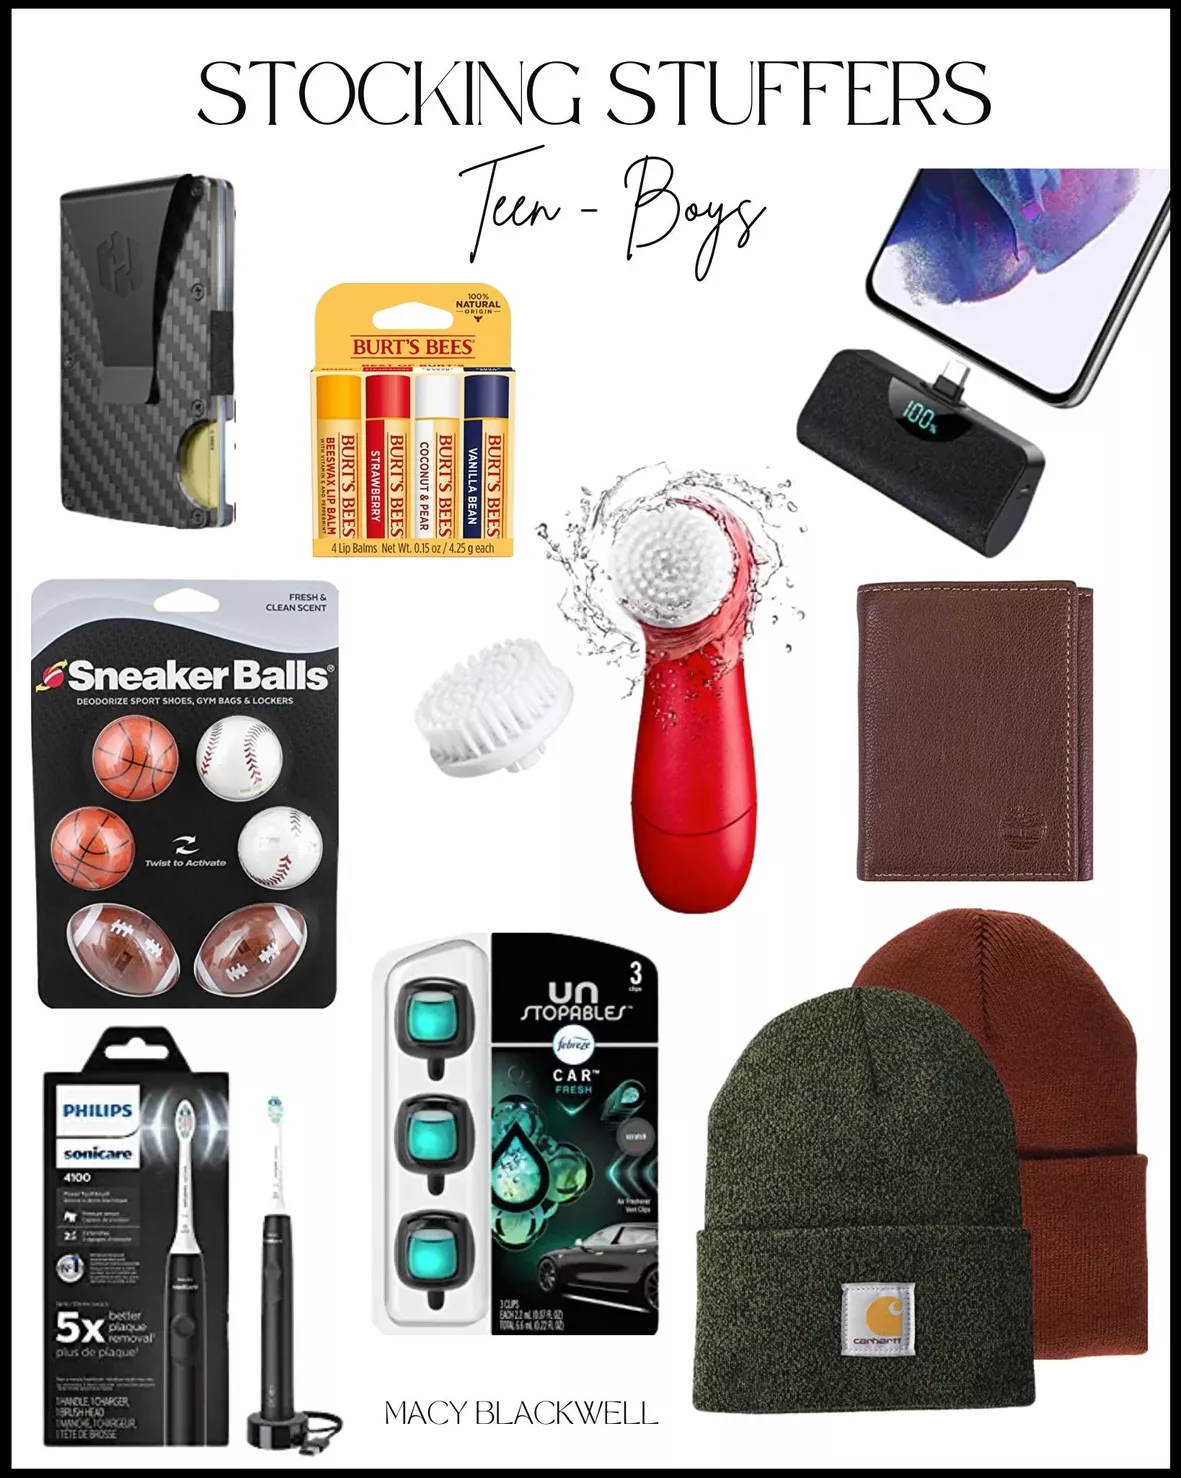 14 Stocking stuffers for Car Guys - She's Your Friend